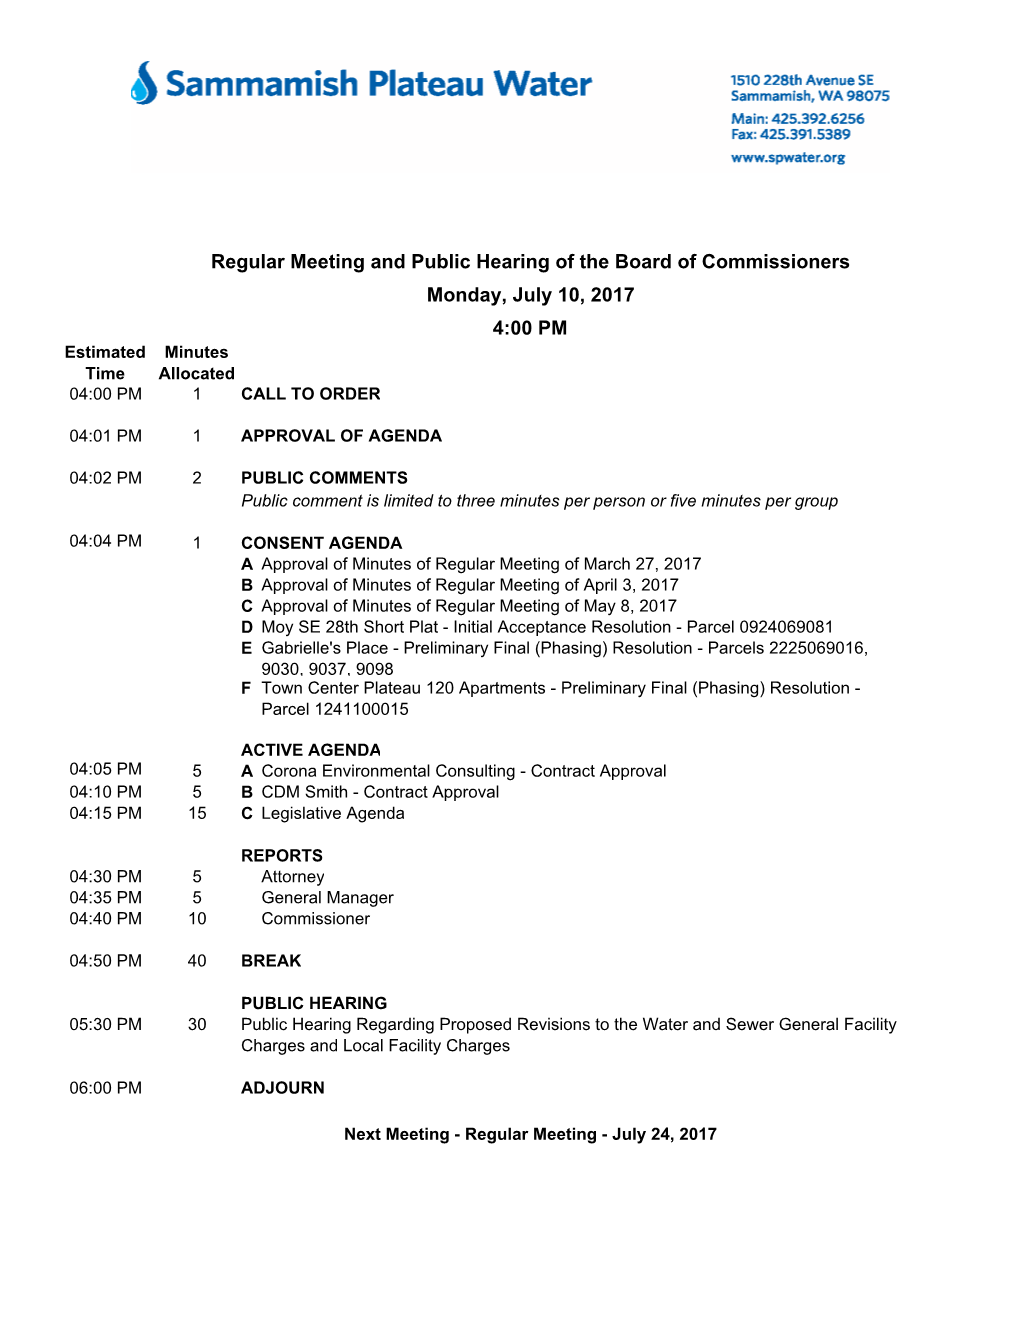 Regular Meeting and Public Hearing of the Board of Commissioners Monday, July 10, 2017 4:00 PM Estimated Minutes Time Allocated 04:00 PM 1 CALL to ORDER